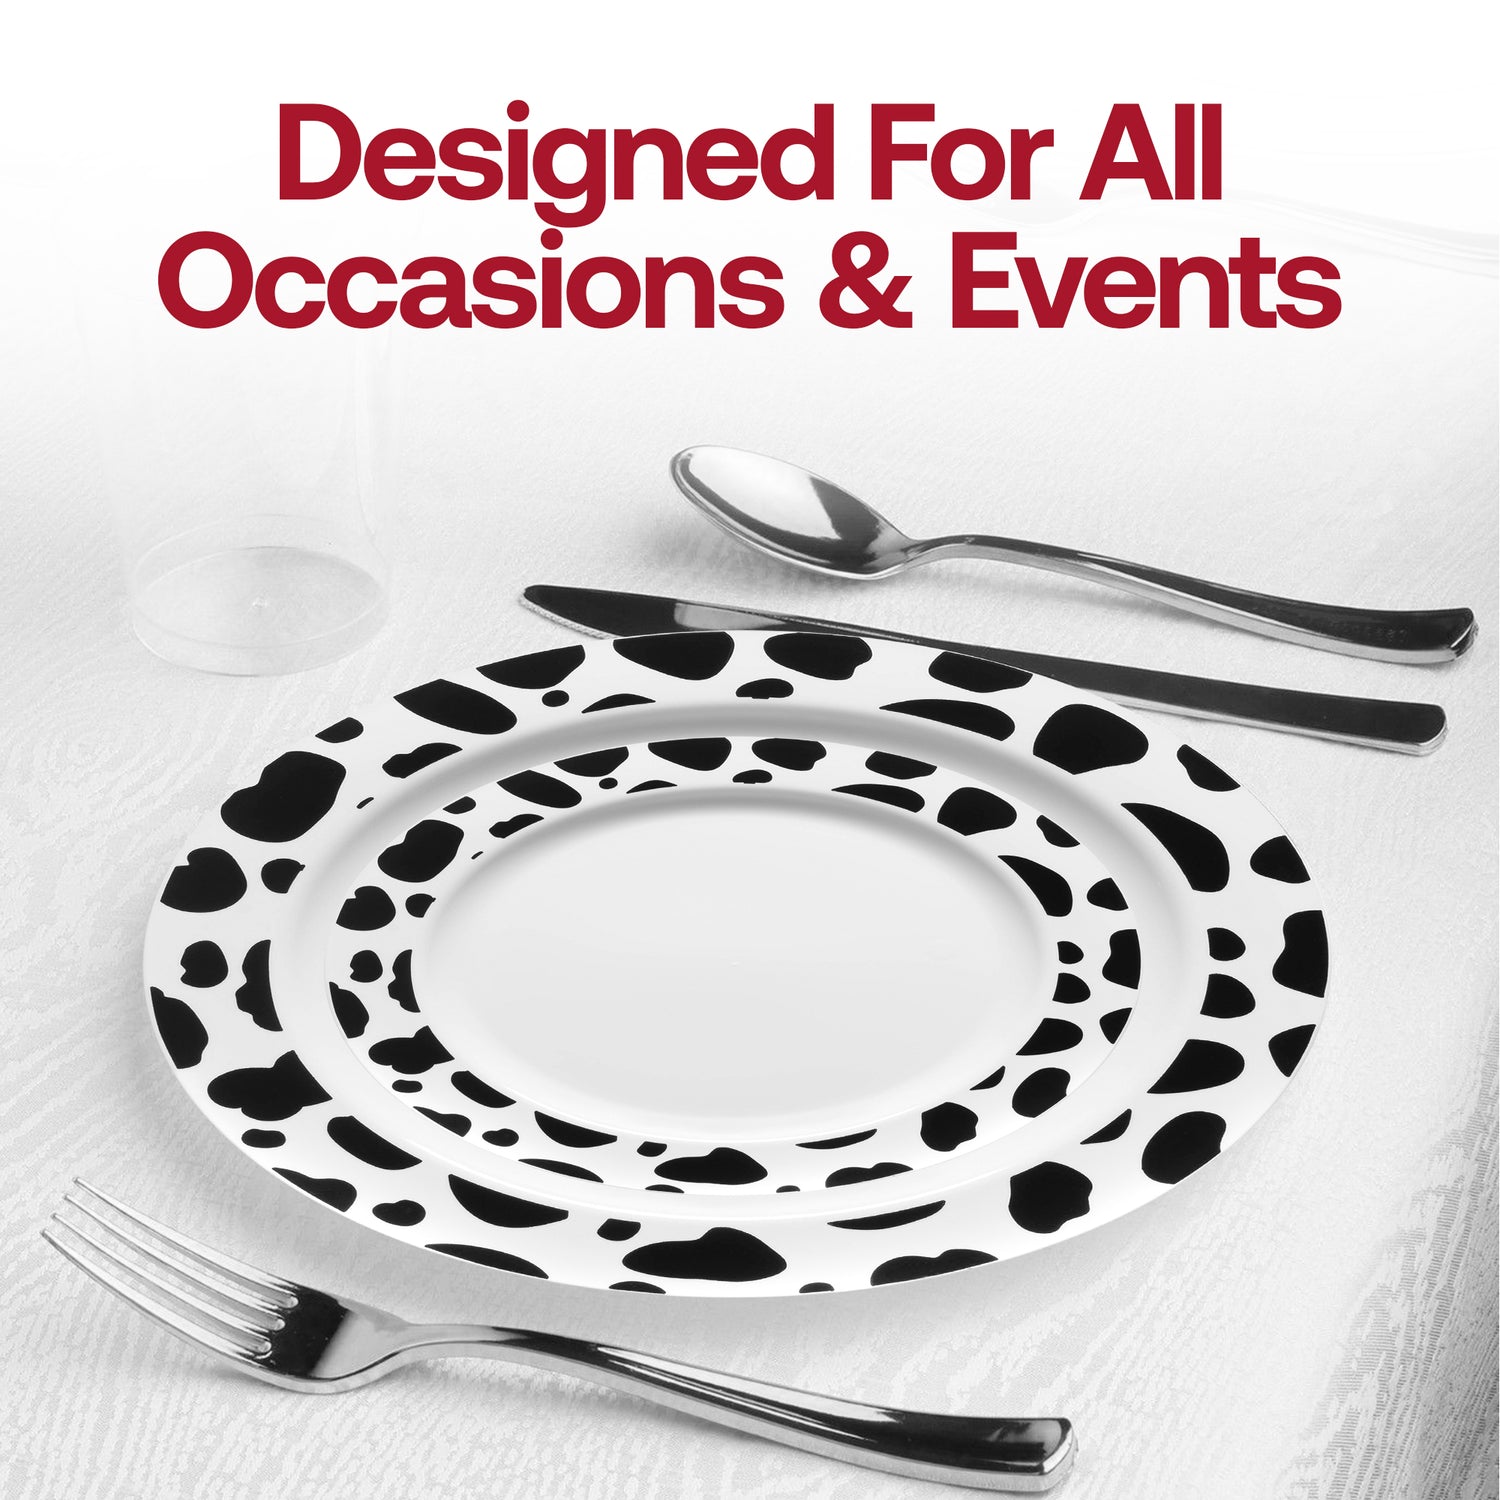 White with Black Dalmatian Spots Round Disposable Plastic Appetizer/Salad Plates (7.5") Lifestyle | The Kaya Collection